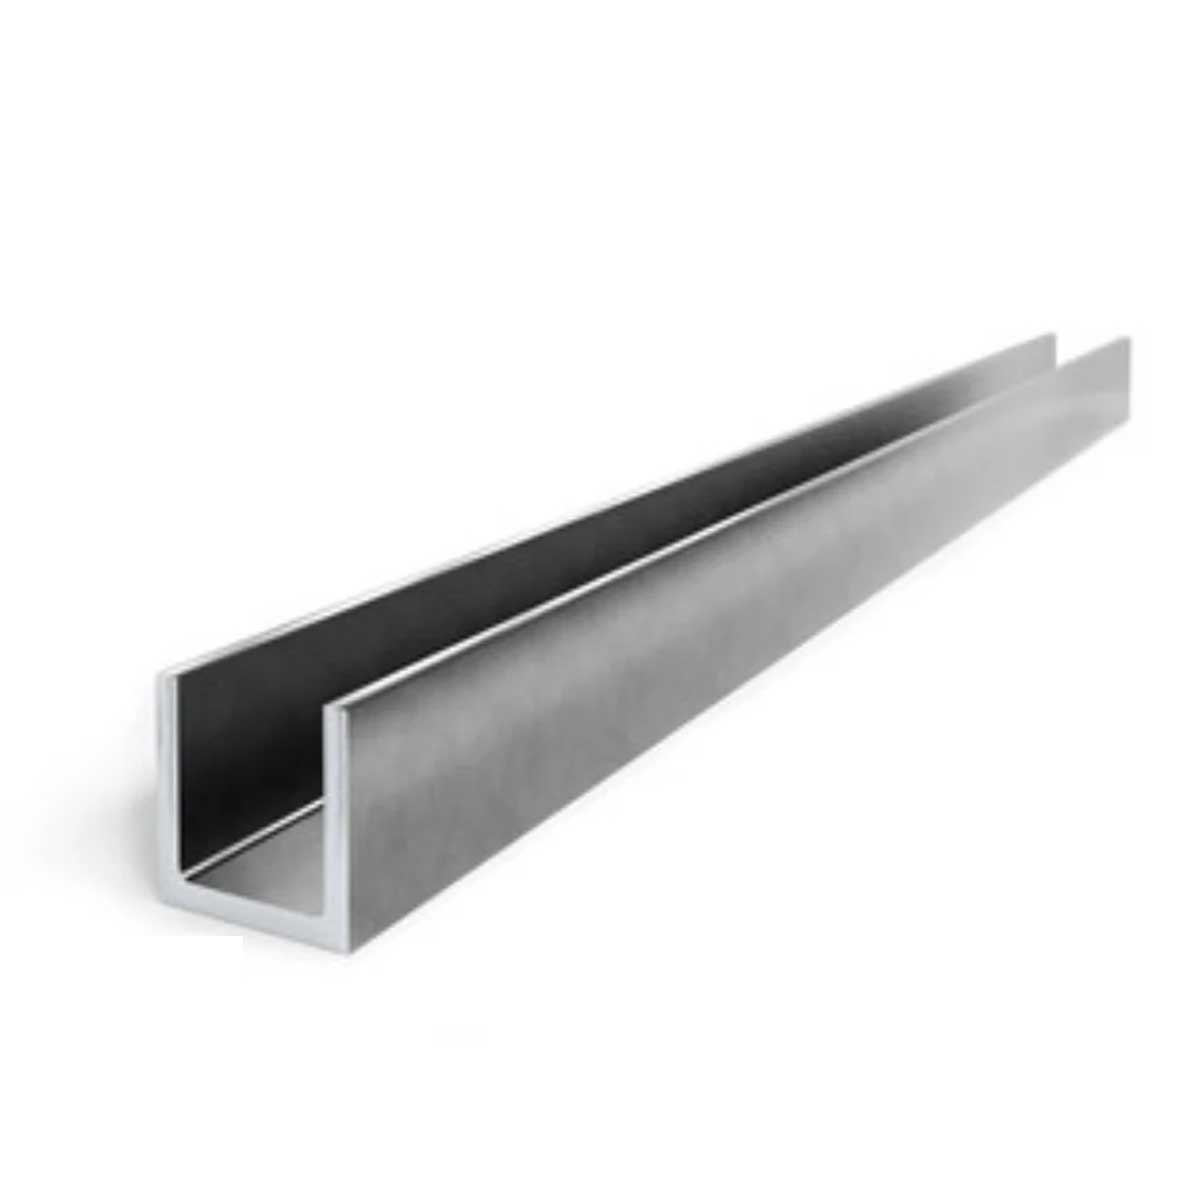 10mm Aluminium U Channel Manufacturers, Suppliers in Ankleshwar